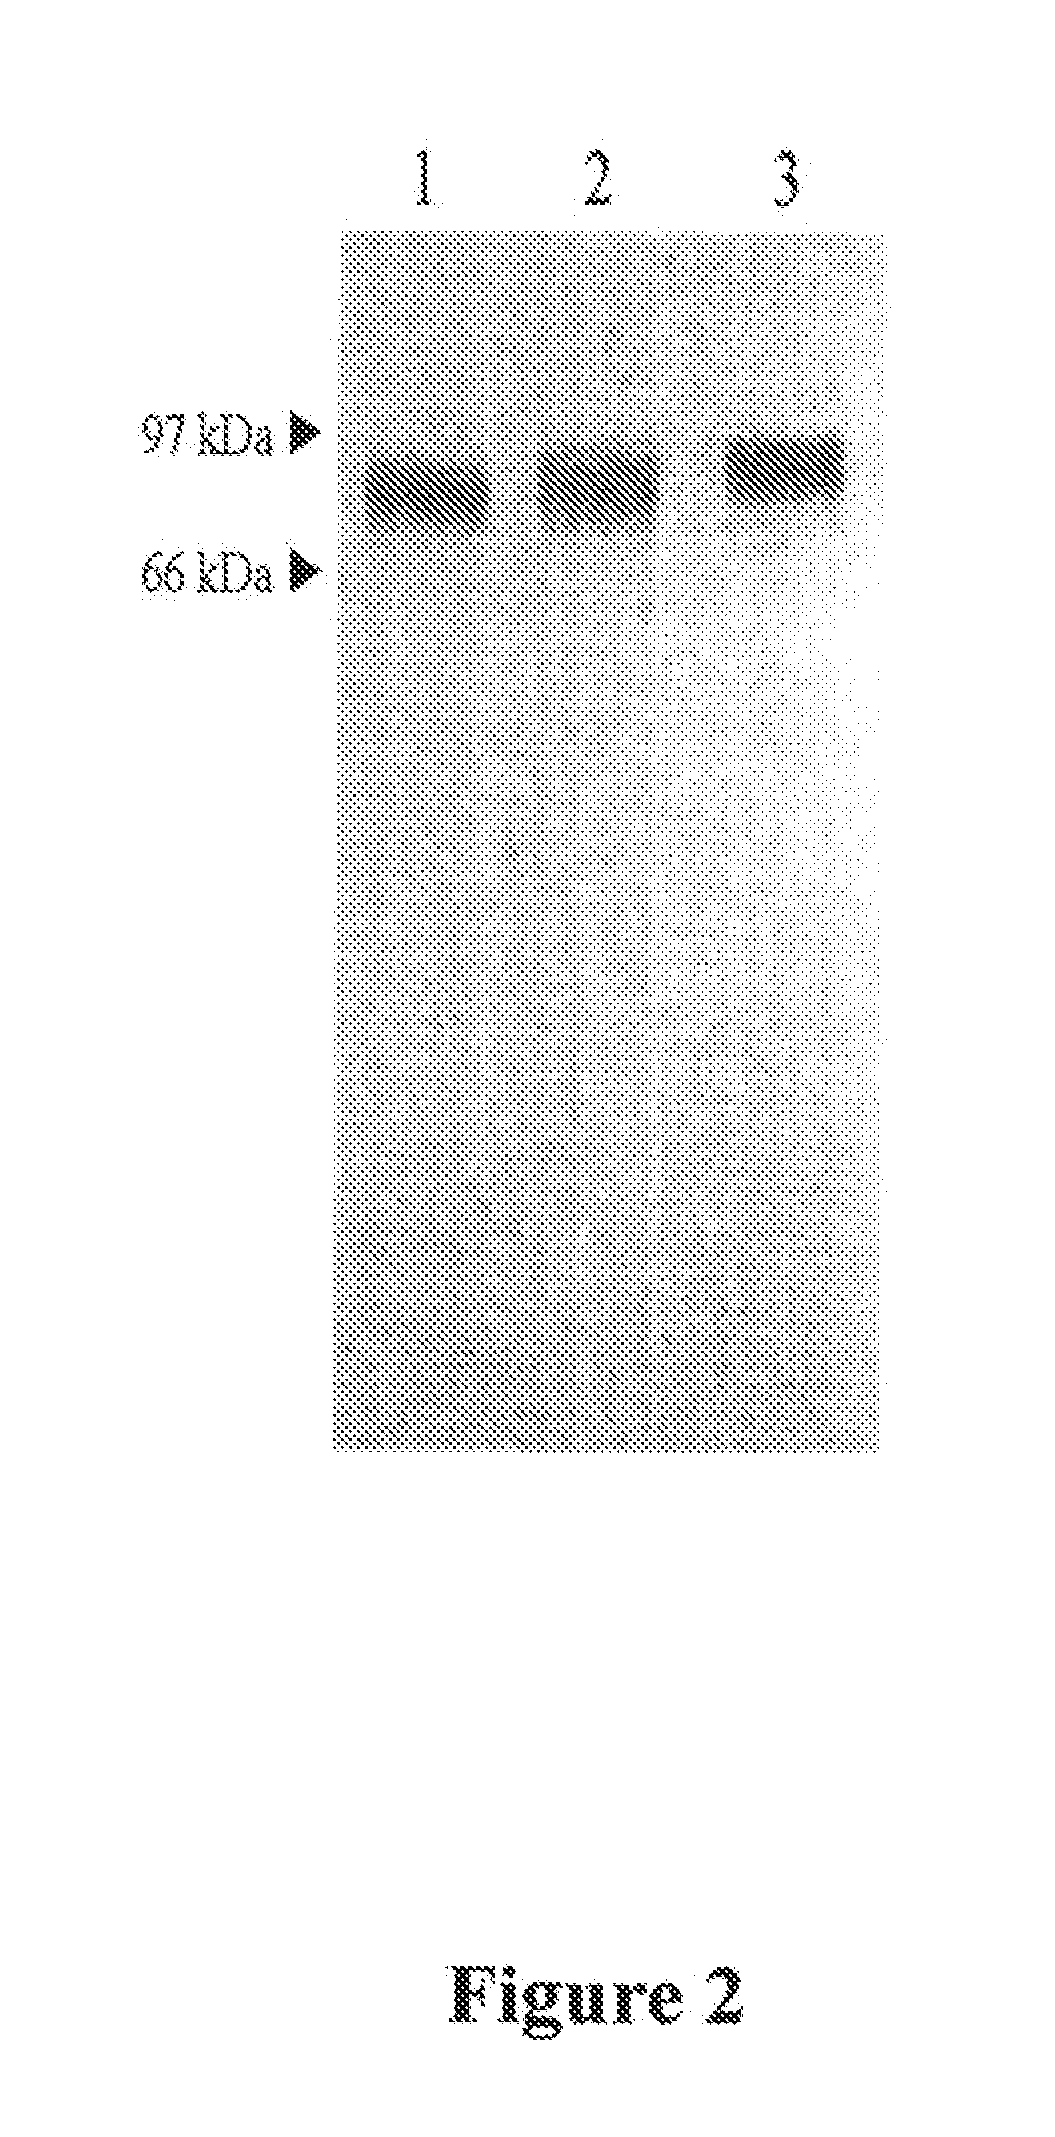 Compositions and methods for treating hypophosphatasia